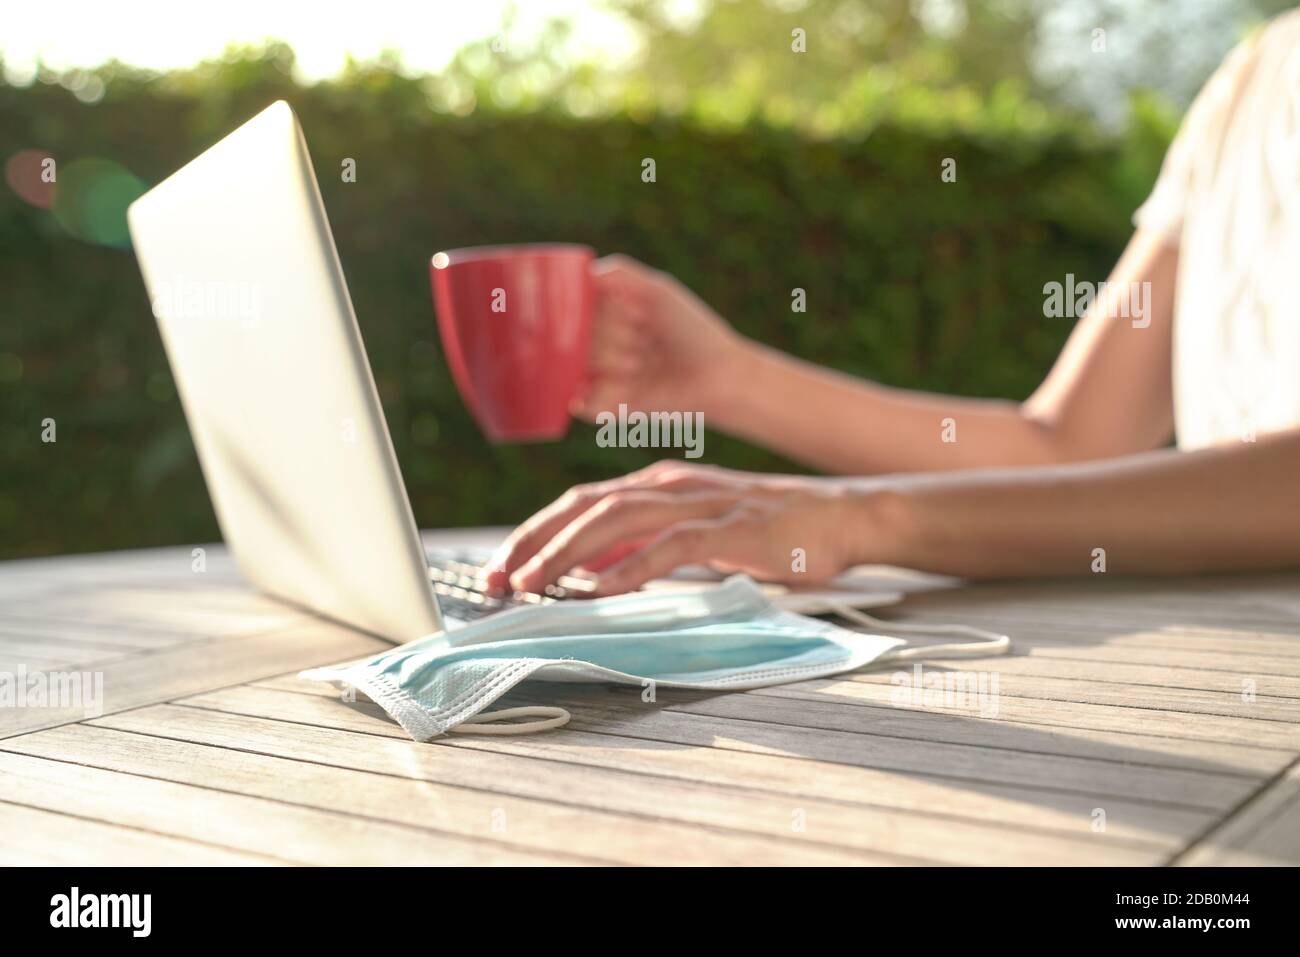 Medical face mask with woman typing and holding a red cup at the background. Work at home concept. Stock Photo